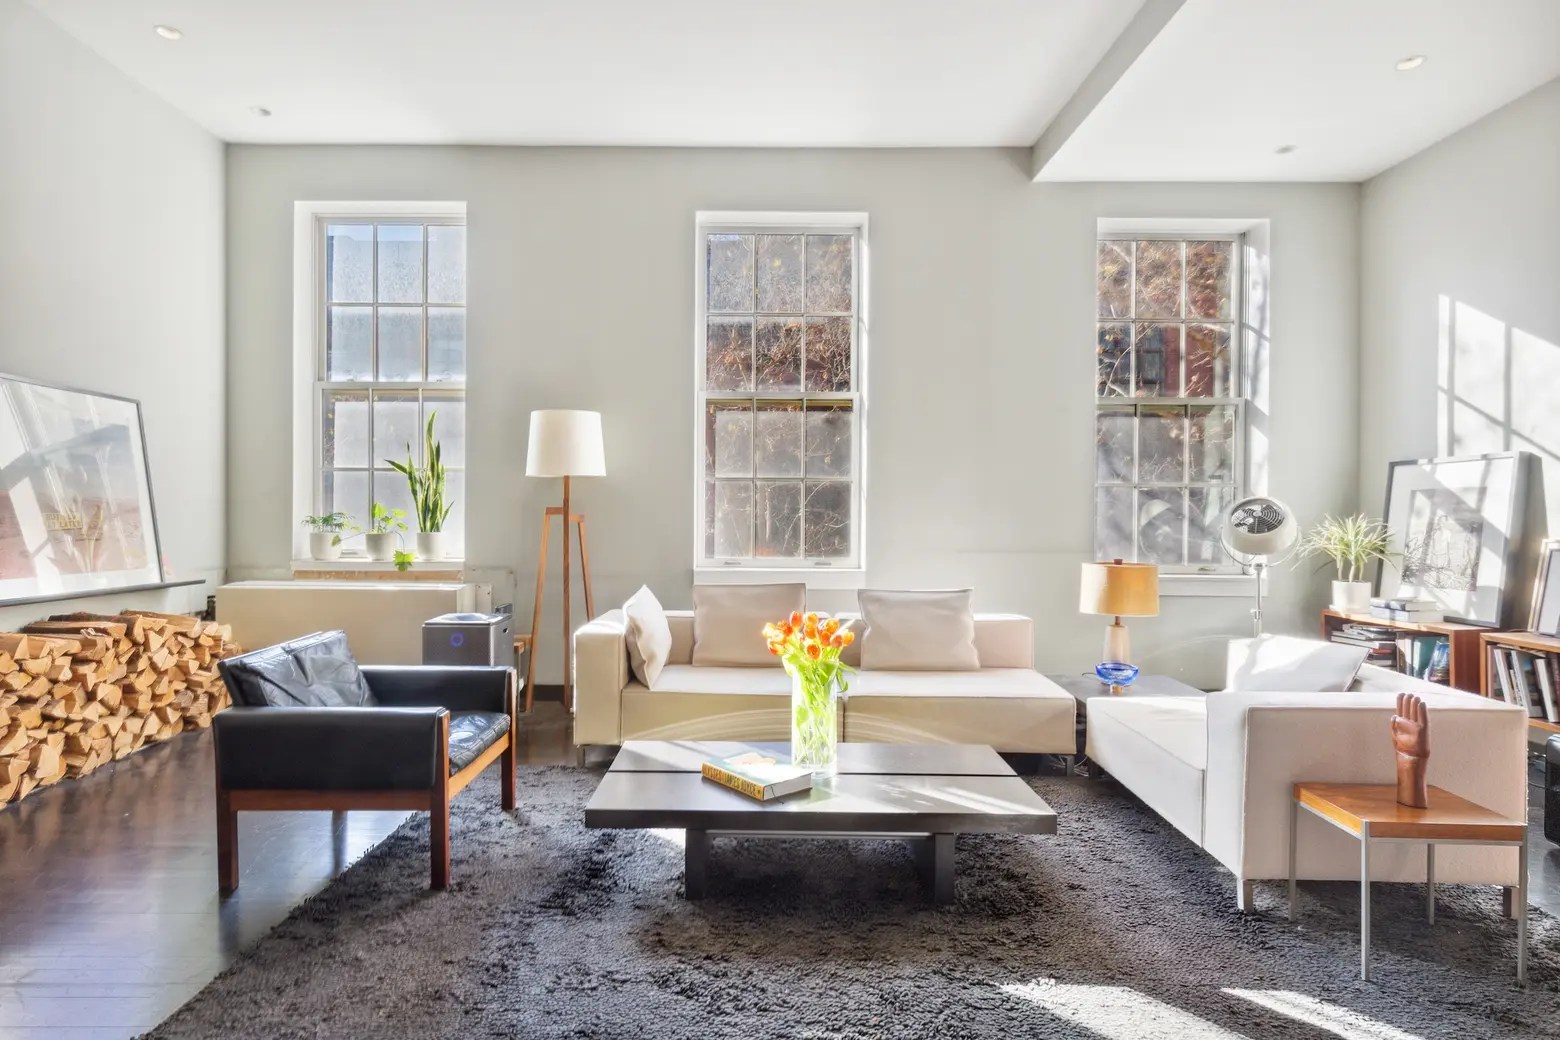 For $1.9M, this cozy Chelsea prewar co-op is surrounded by beauty